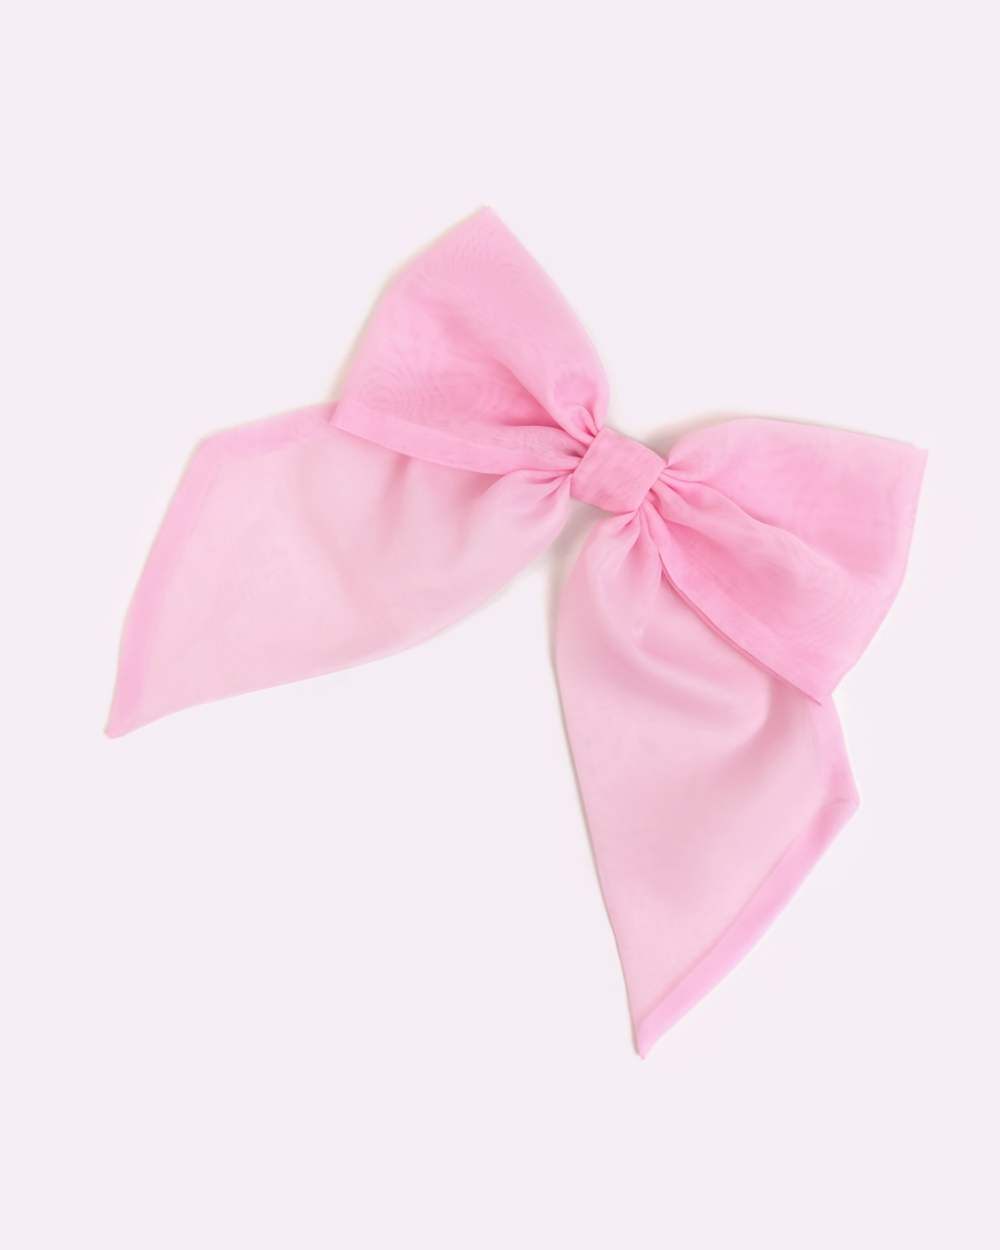 Pink brooch in the shape of a giant bow made of voile by melikestea.